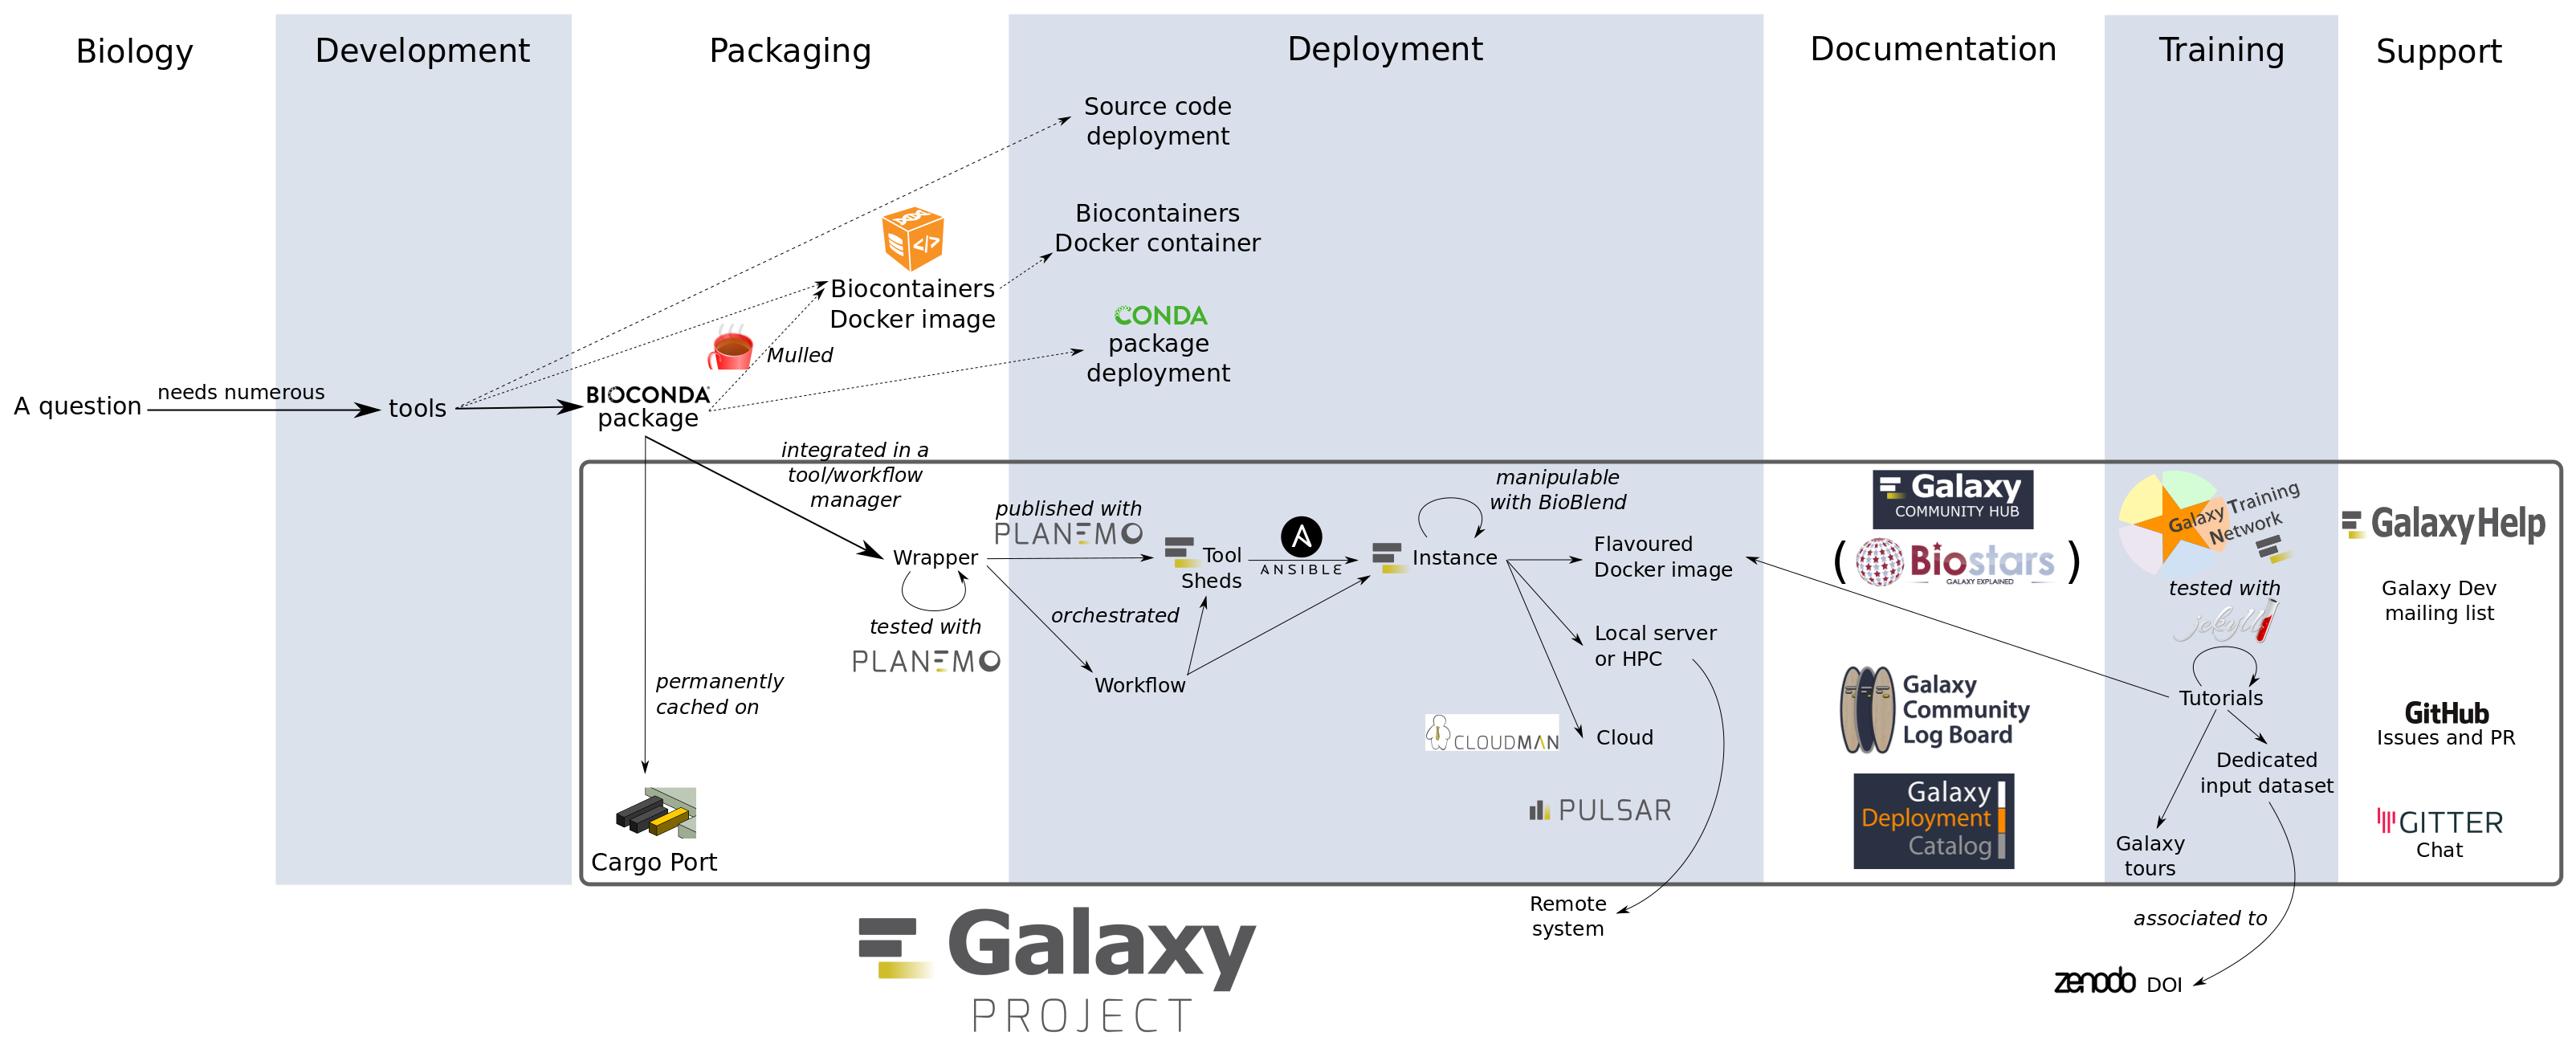 Large graphic showing different domains and where different portions of the Galaxy community can be found from Biology, Dev, Packaging, Deployment, Documentation, Training, and Support.